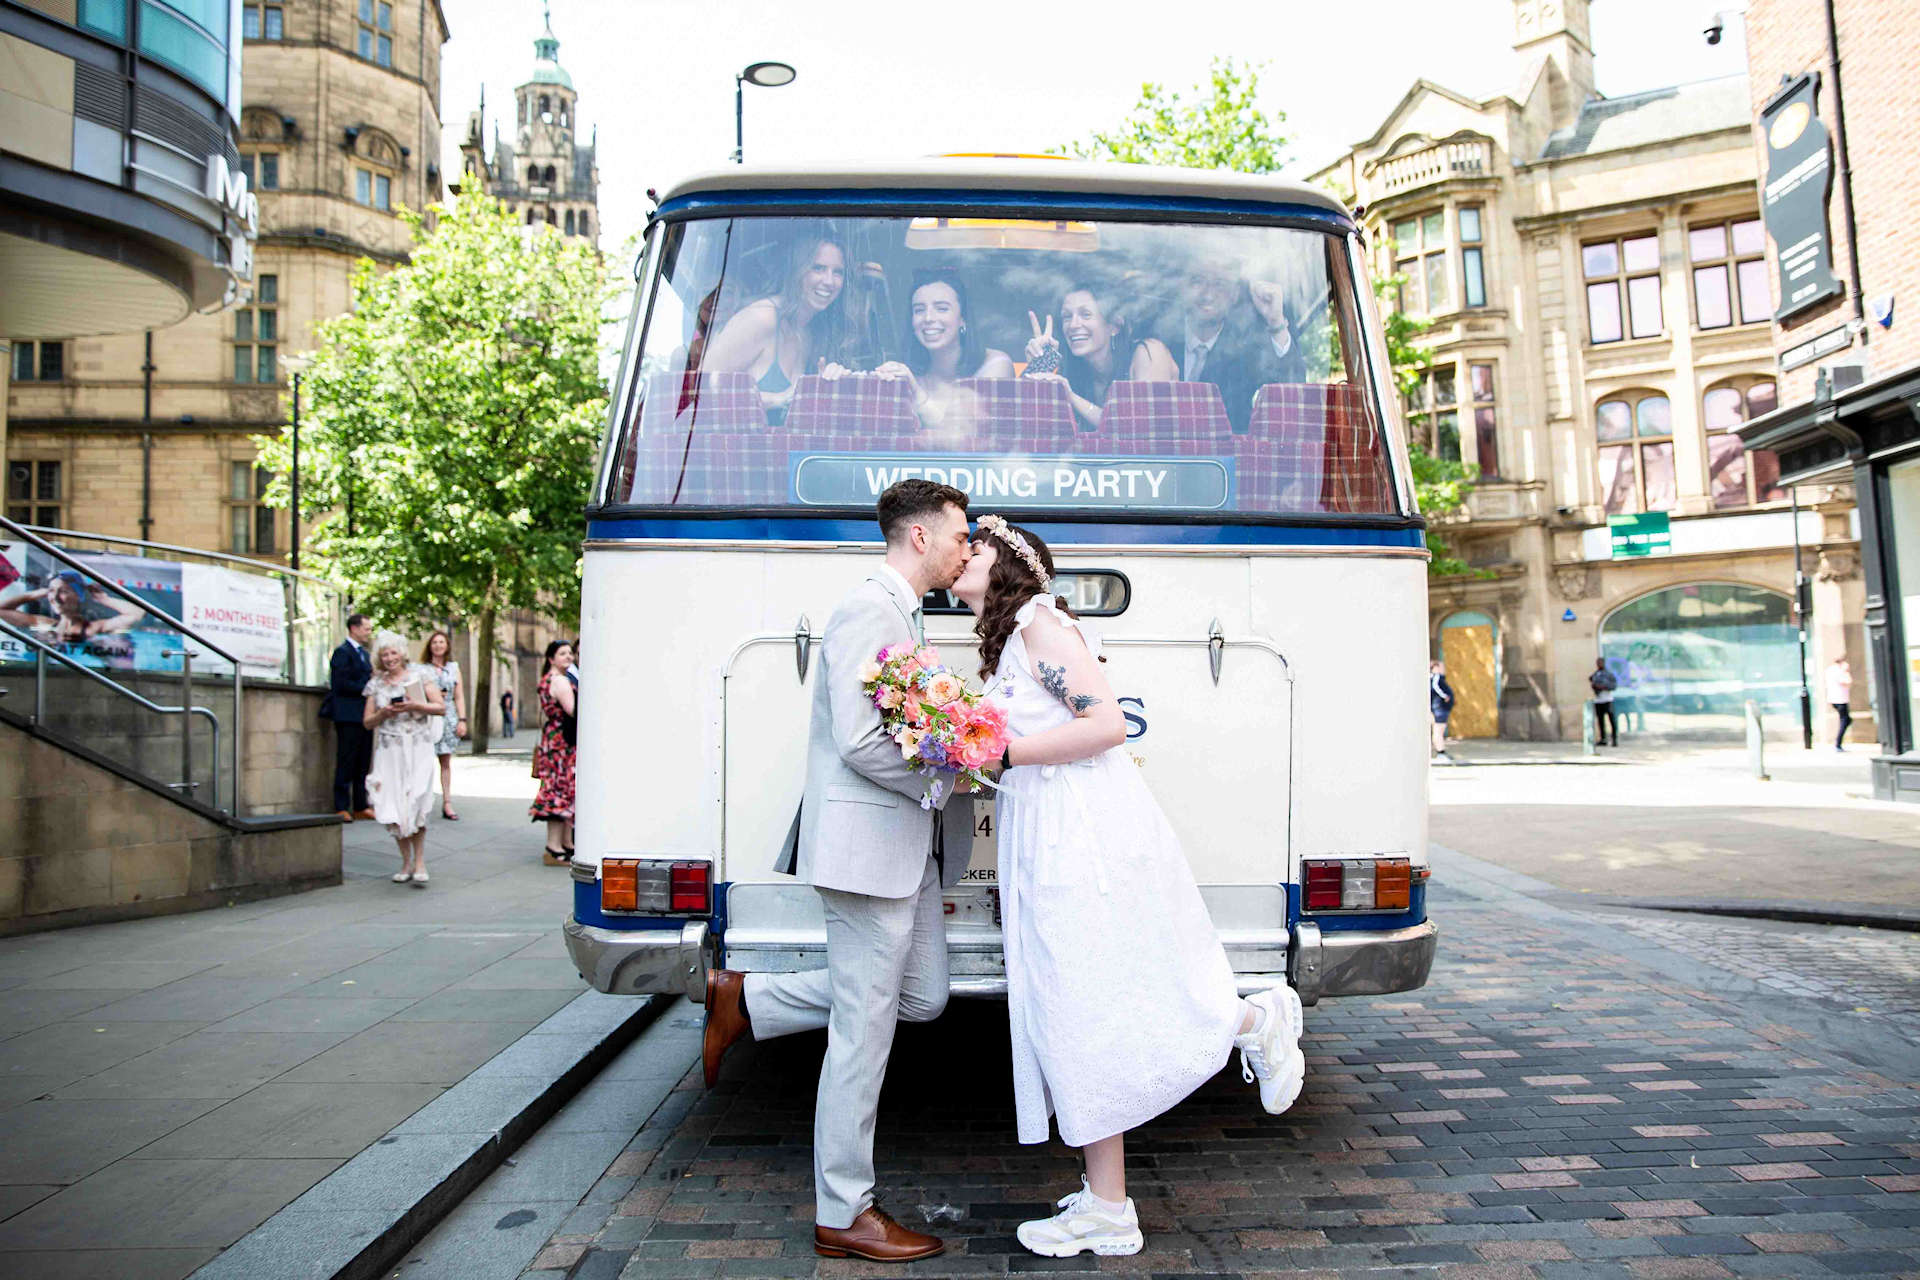 Wedding party coach in Yorkshire